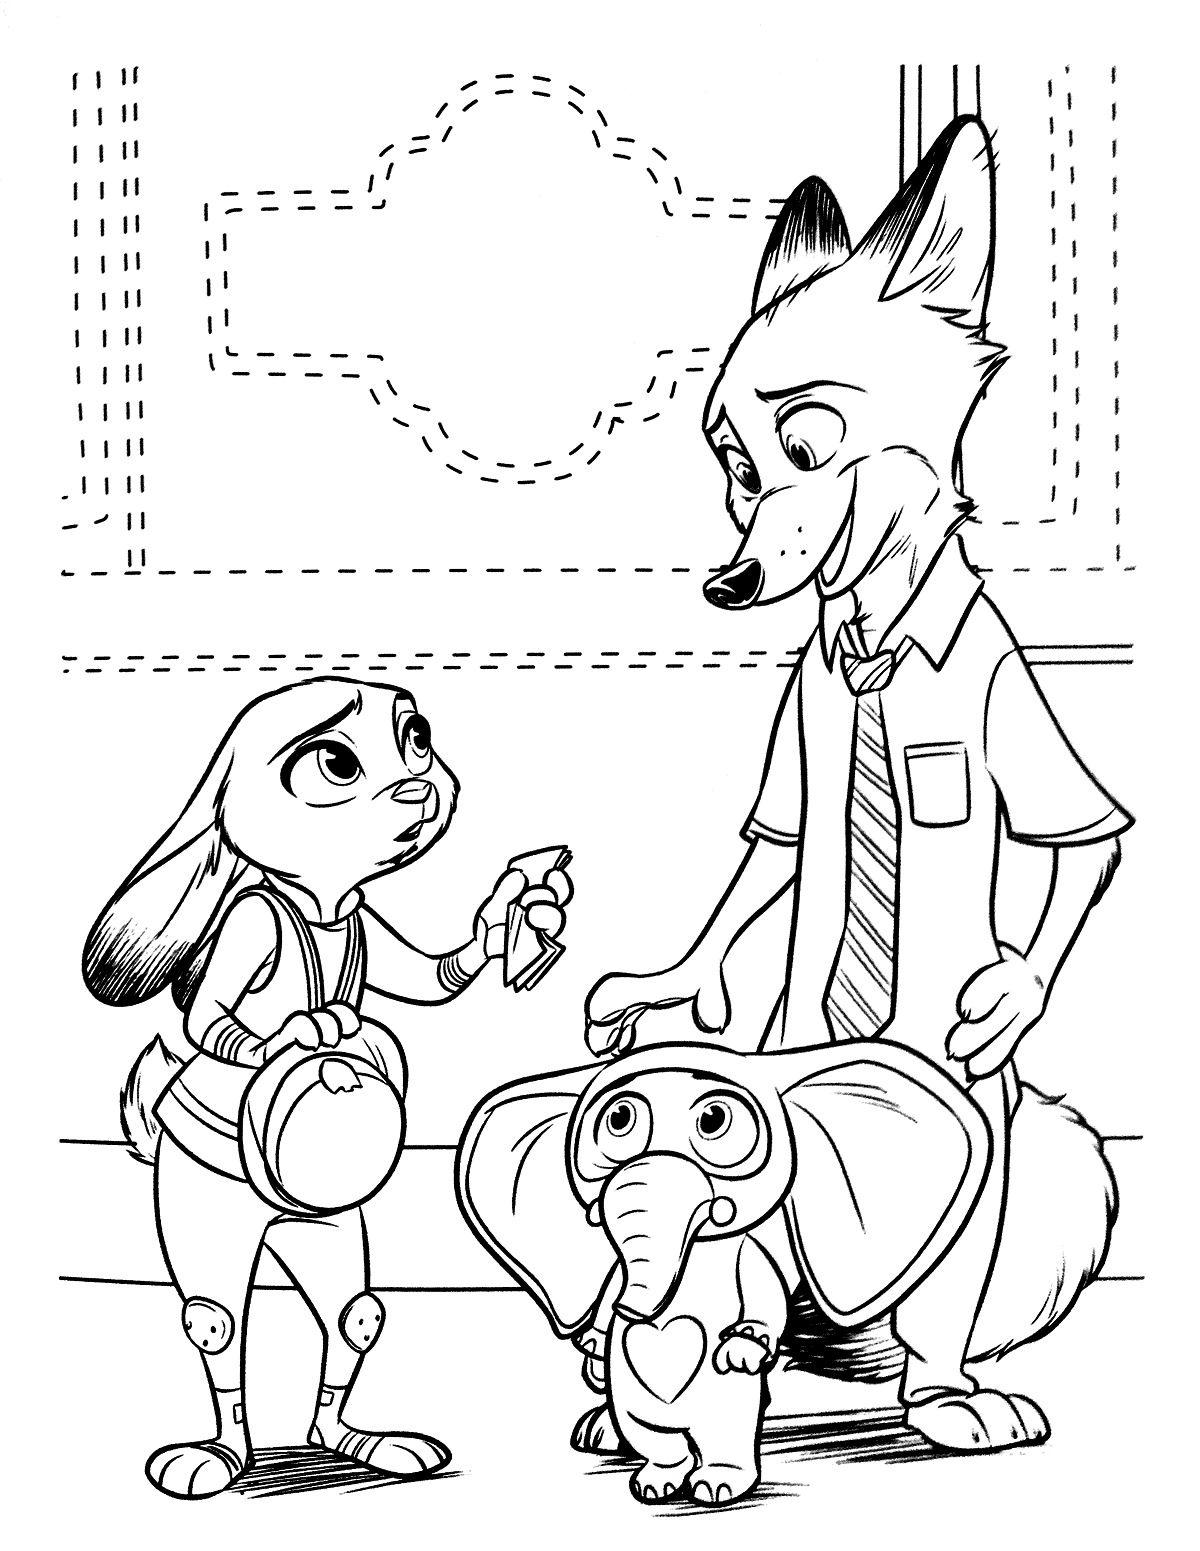 Zootopia Coloring Pages   Best Coloring Pages For Kids